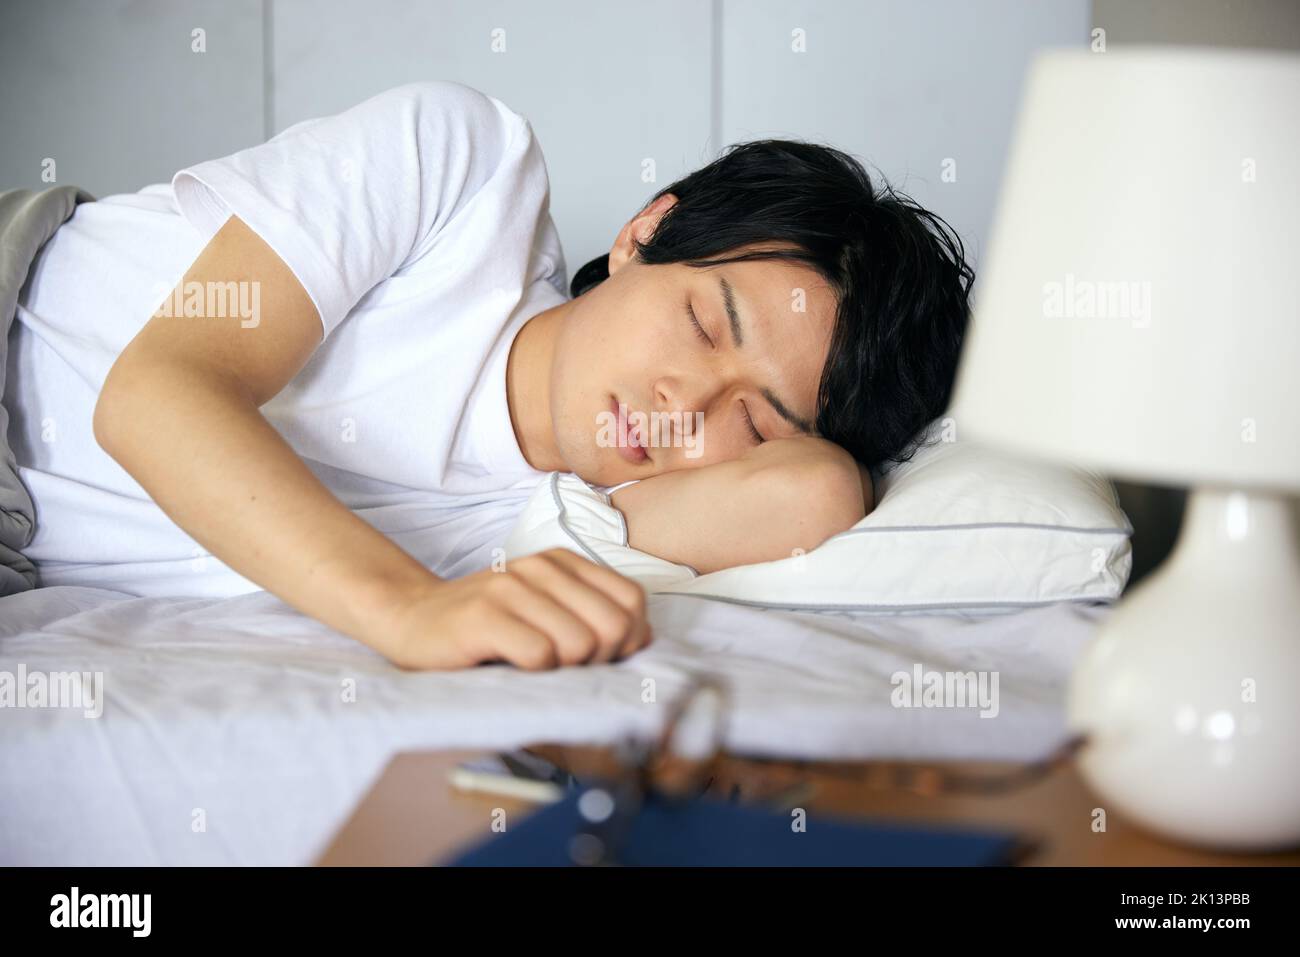 Japanese man in bed Stock Photo